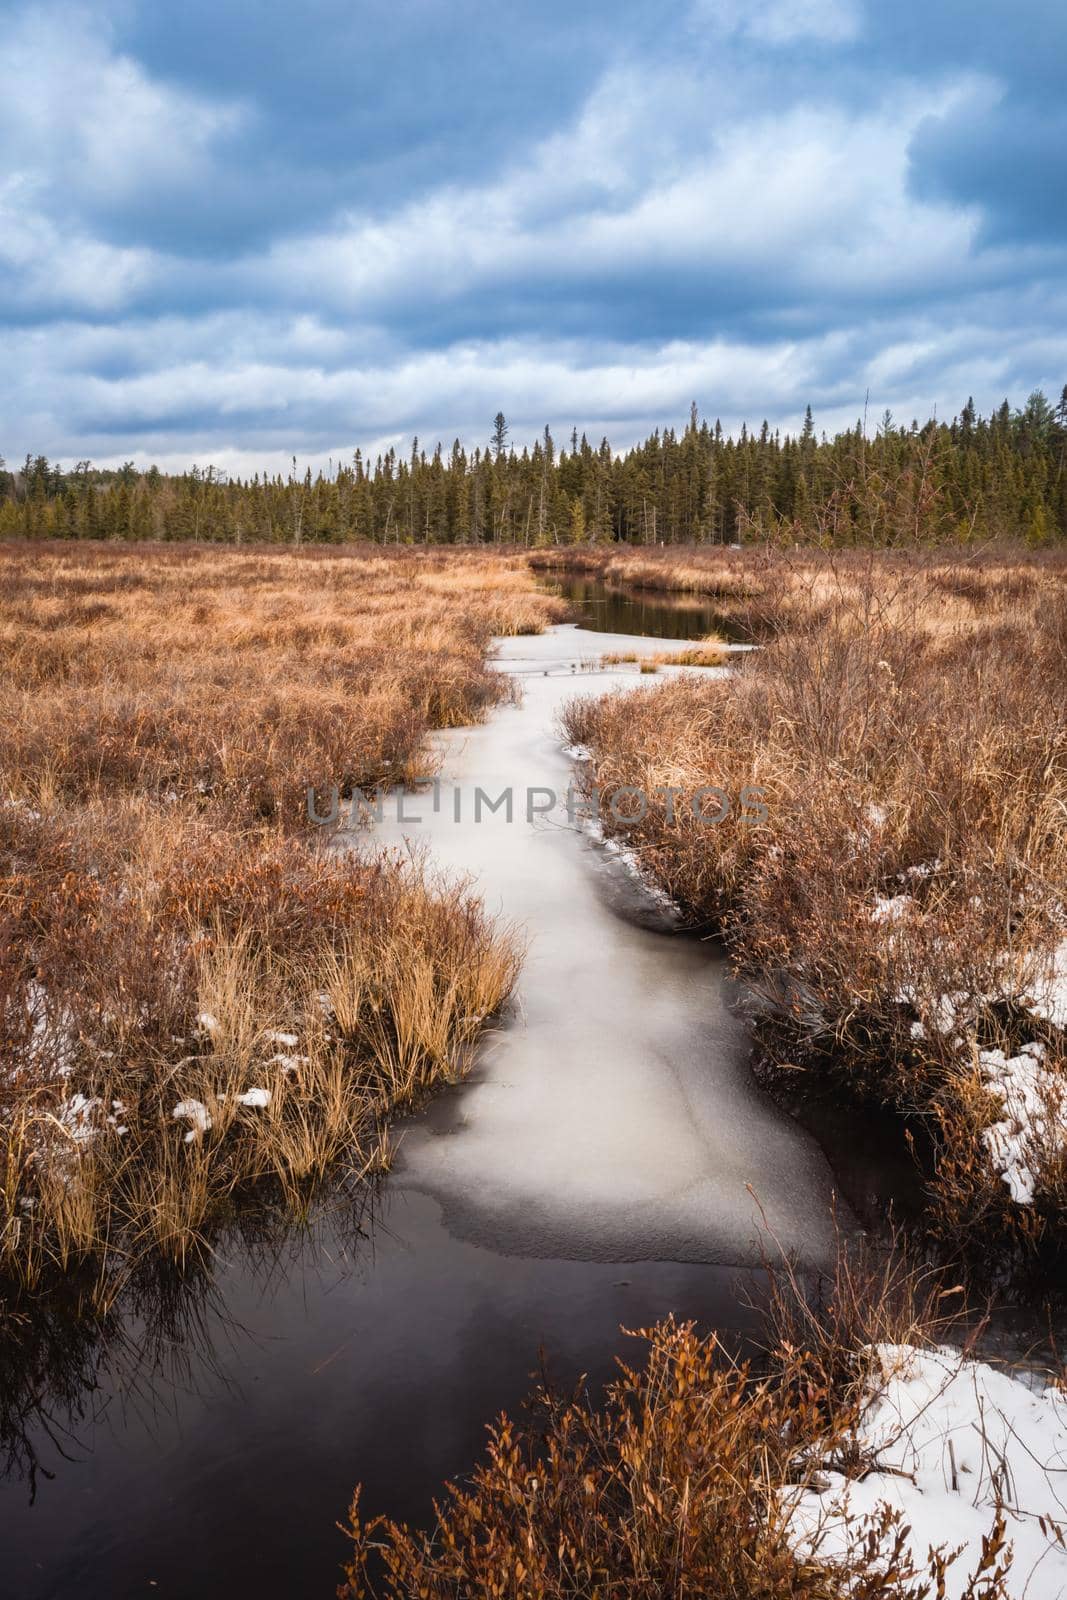 A stream of water is forming ice across its surface in early winter as it runs through a bog towards a forest with evergreen trees. Snow is seen on dried foliage on either side of the water.